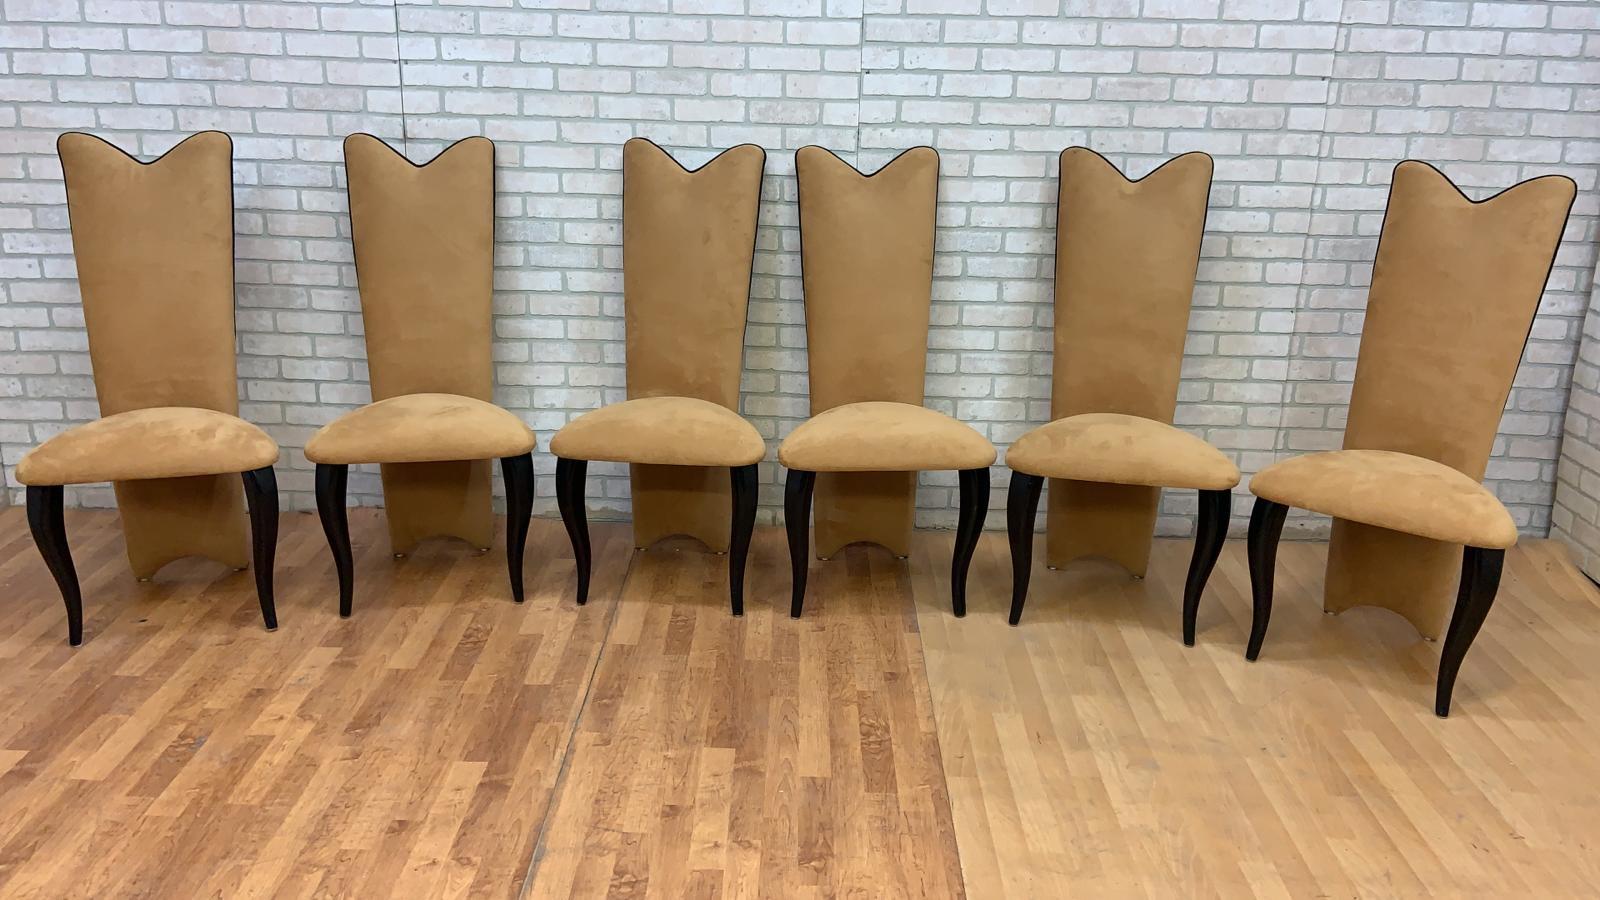 Art Deco Glass Extending Dining Table with High Back Dining Chairs - 9 Piece Set For Sale 5